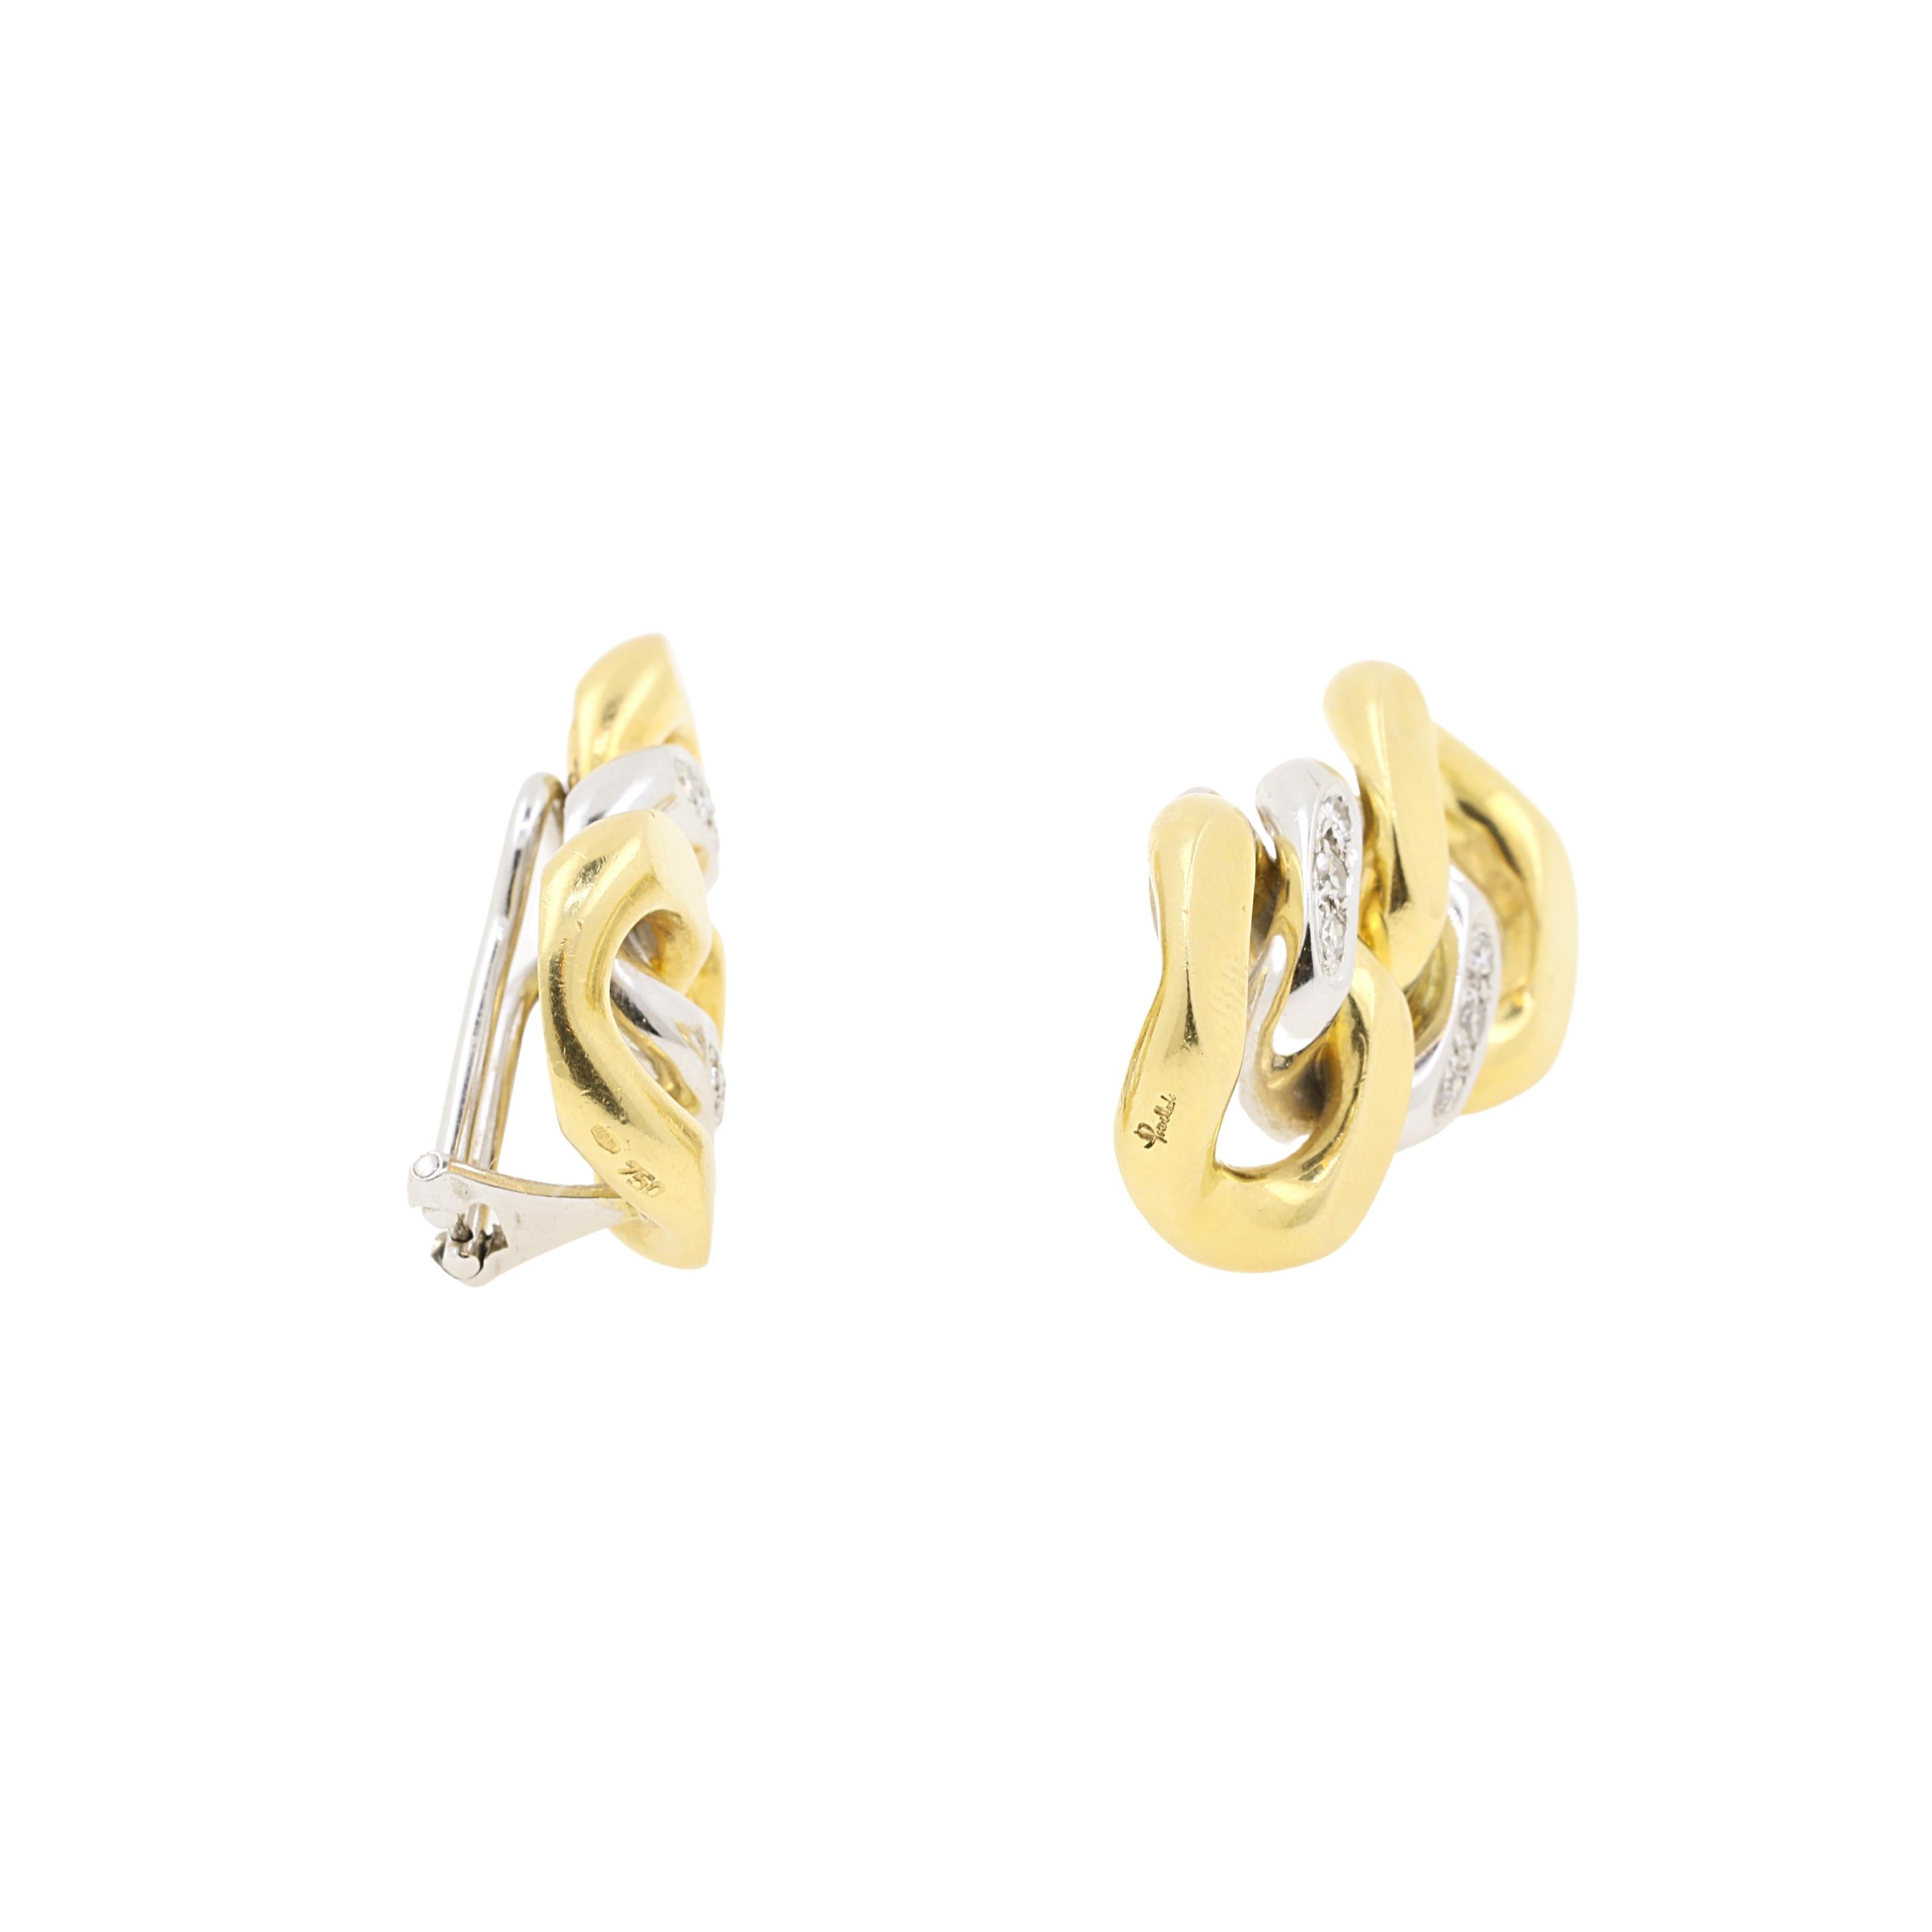 Modern Pomellato 18K Yellow and White Gold Earrings with Diamonds 